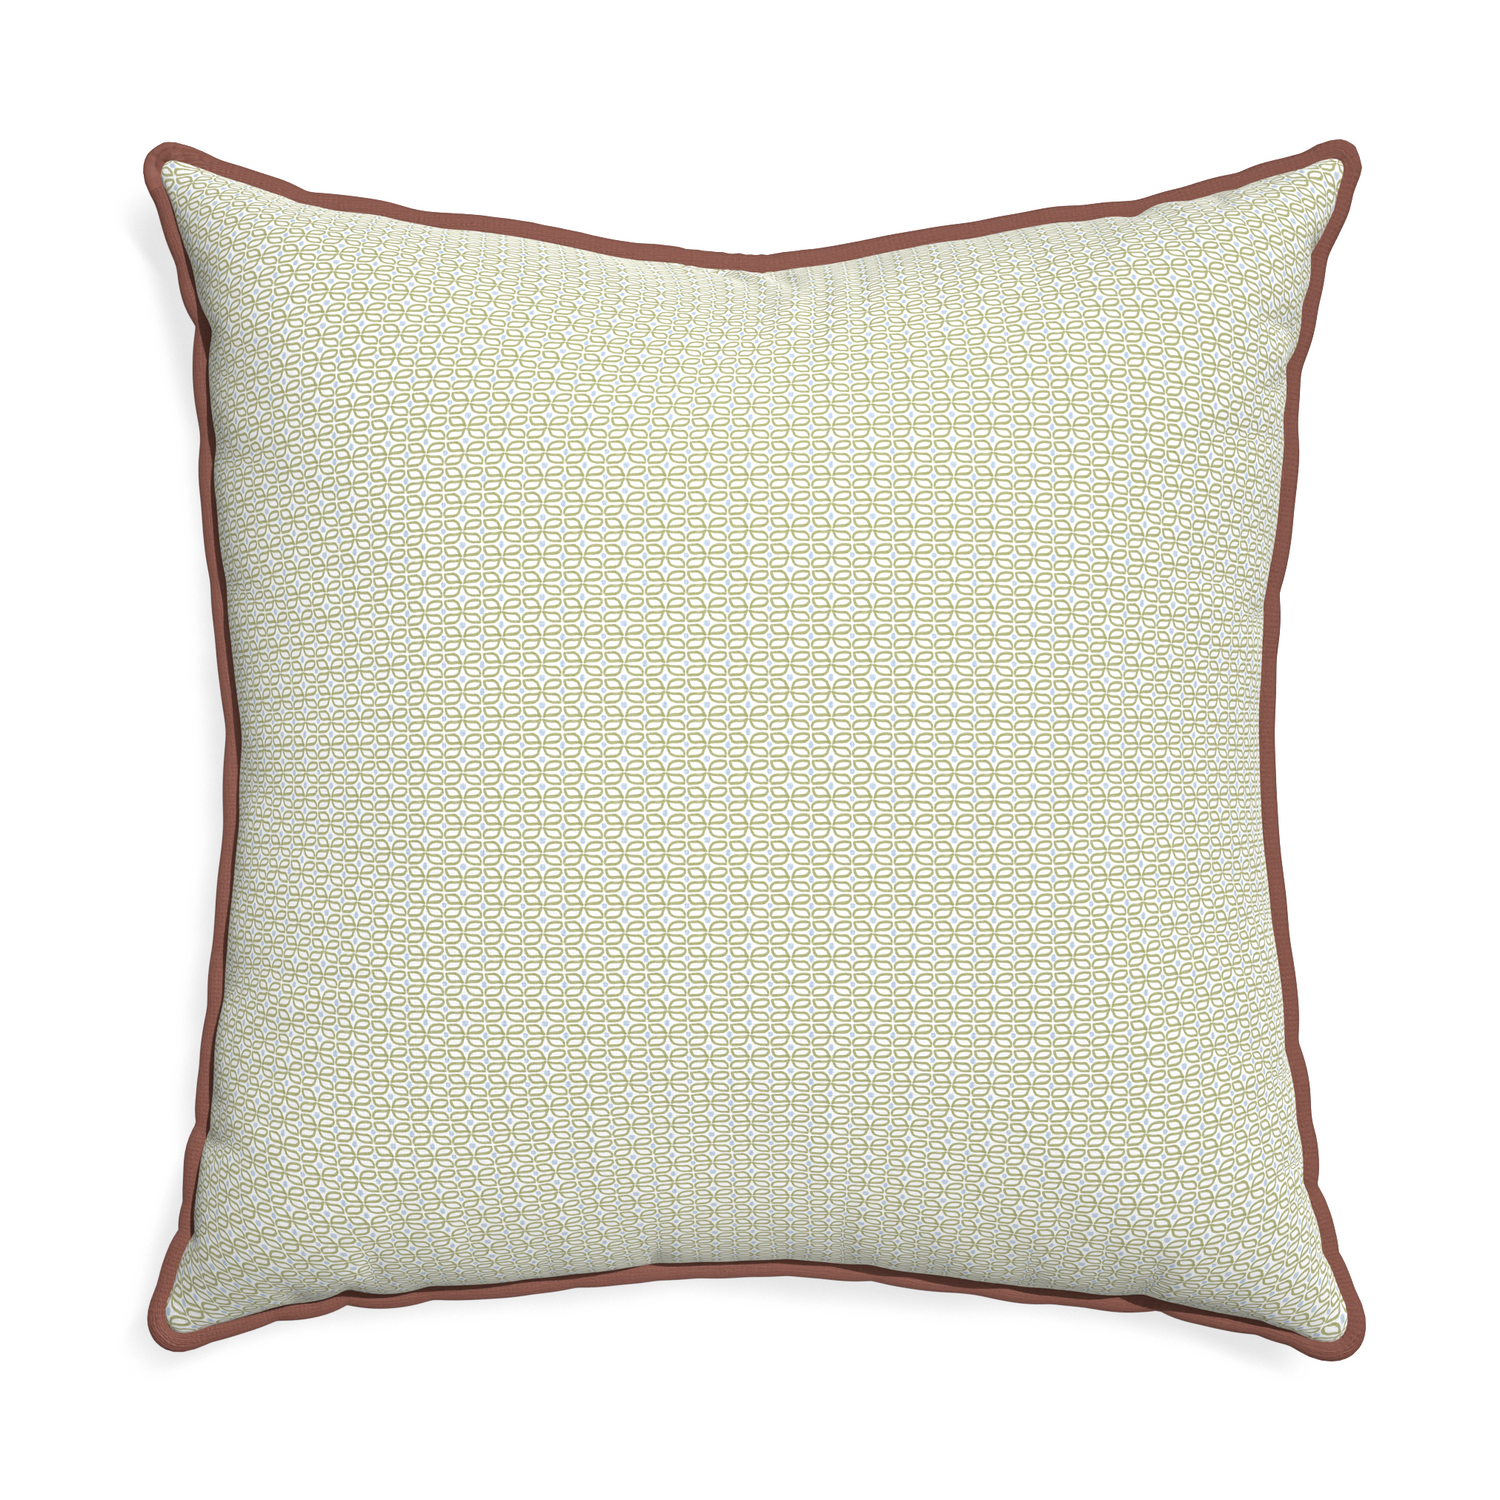 Euro-sham loomi moss custom moss green geometricpillow with w piping on white background